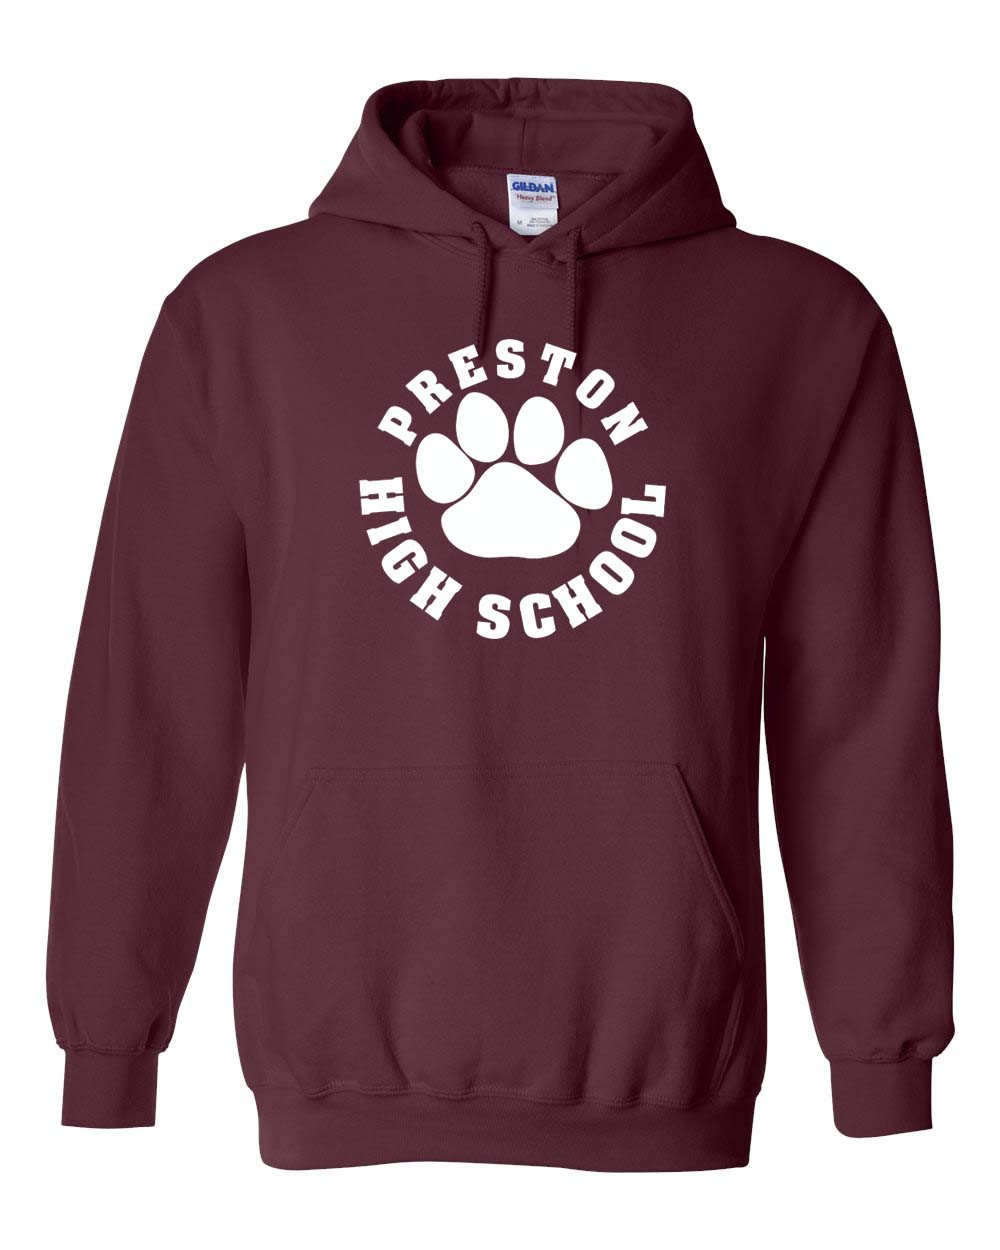 PHS Staff Hoodie w/ White Logo - Please allow 2-3 Weeks for Delivery